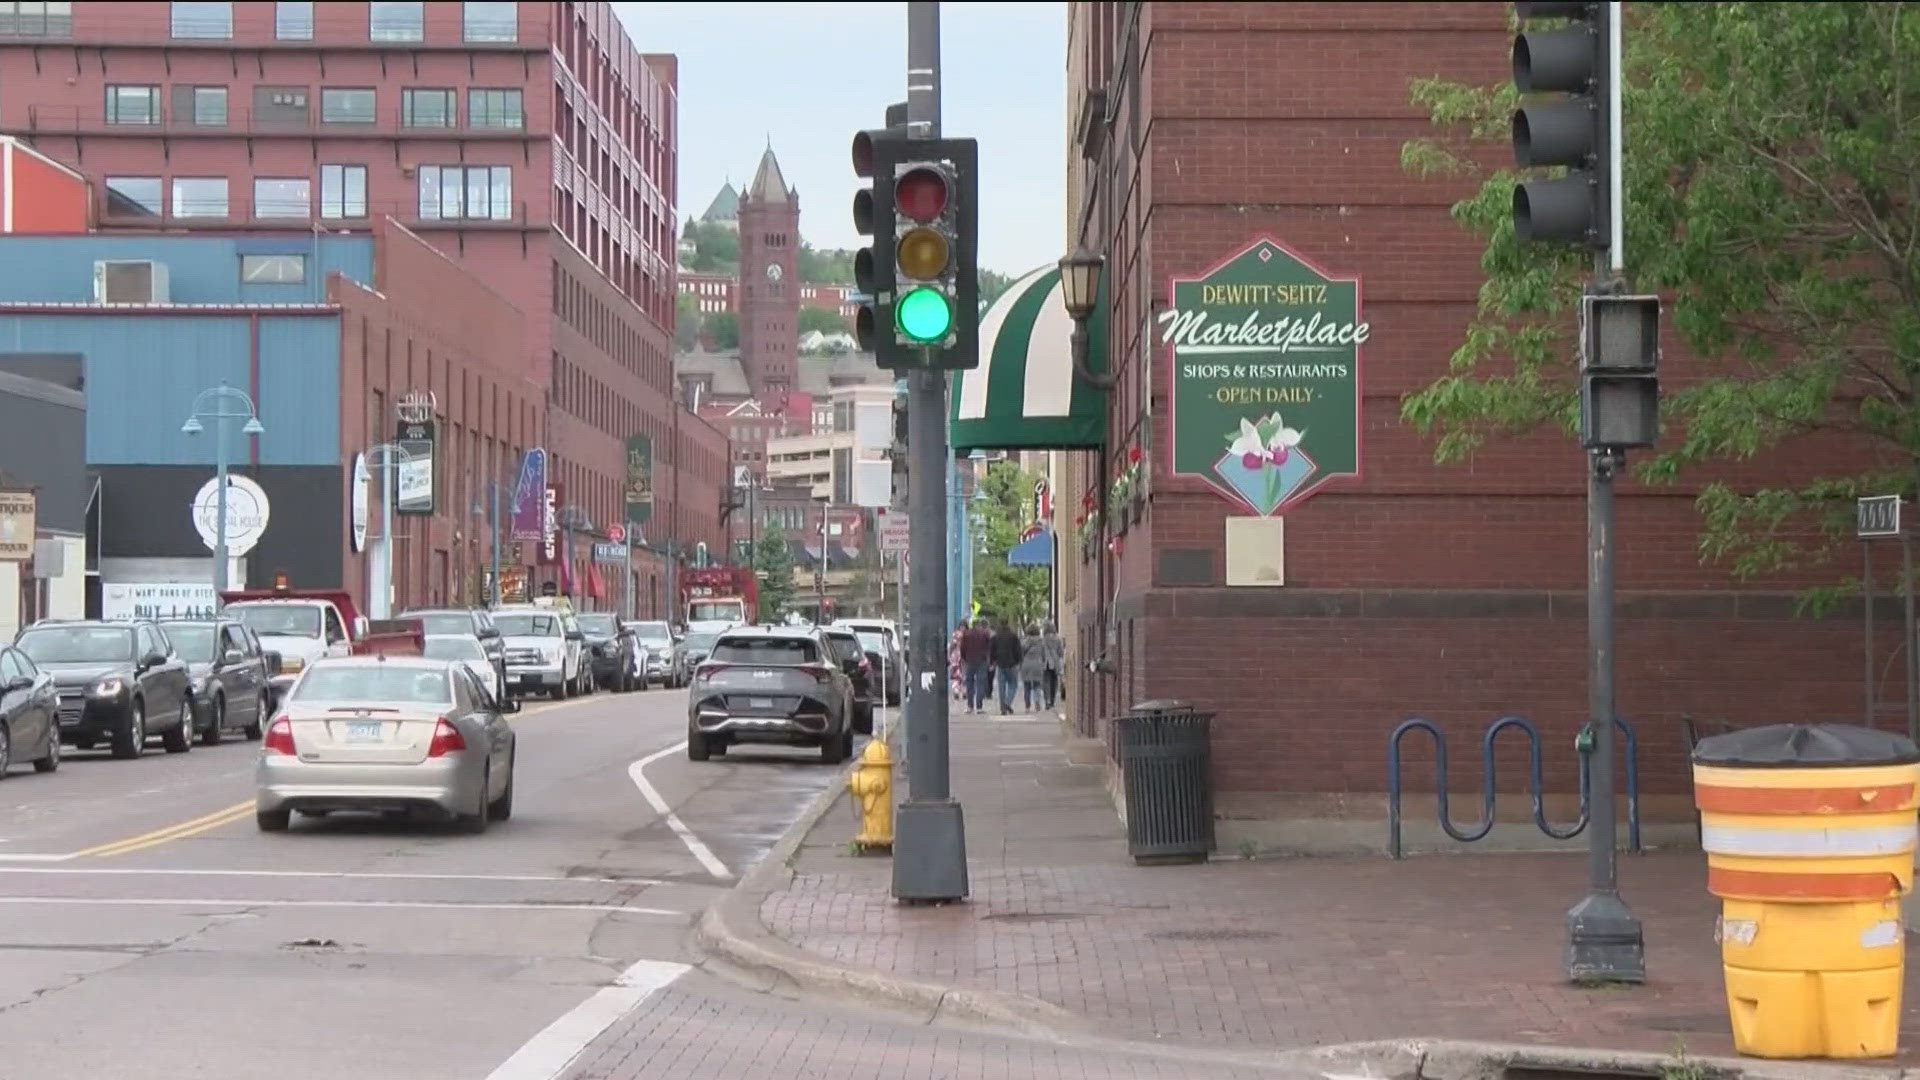 Businesses in Duluth say they're ready to welcome thousands of racers and their supporters this weekend for the annual Grandma's Marathon.